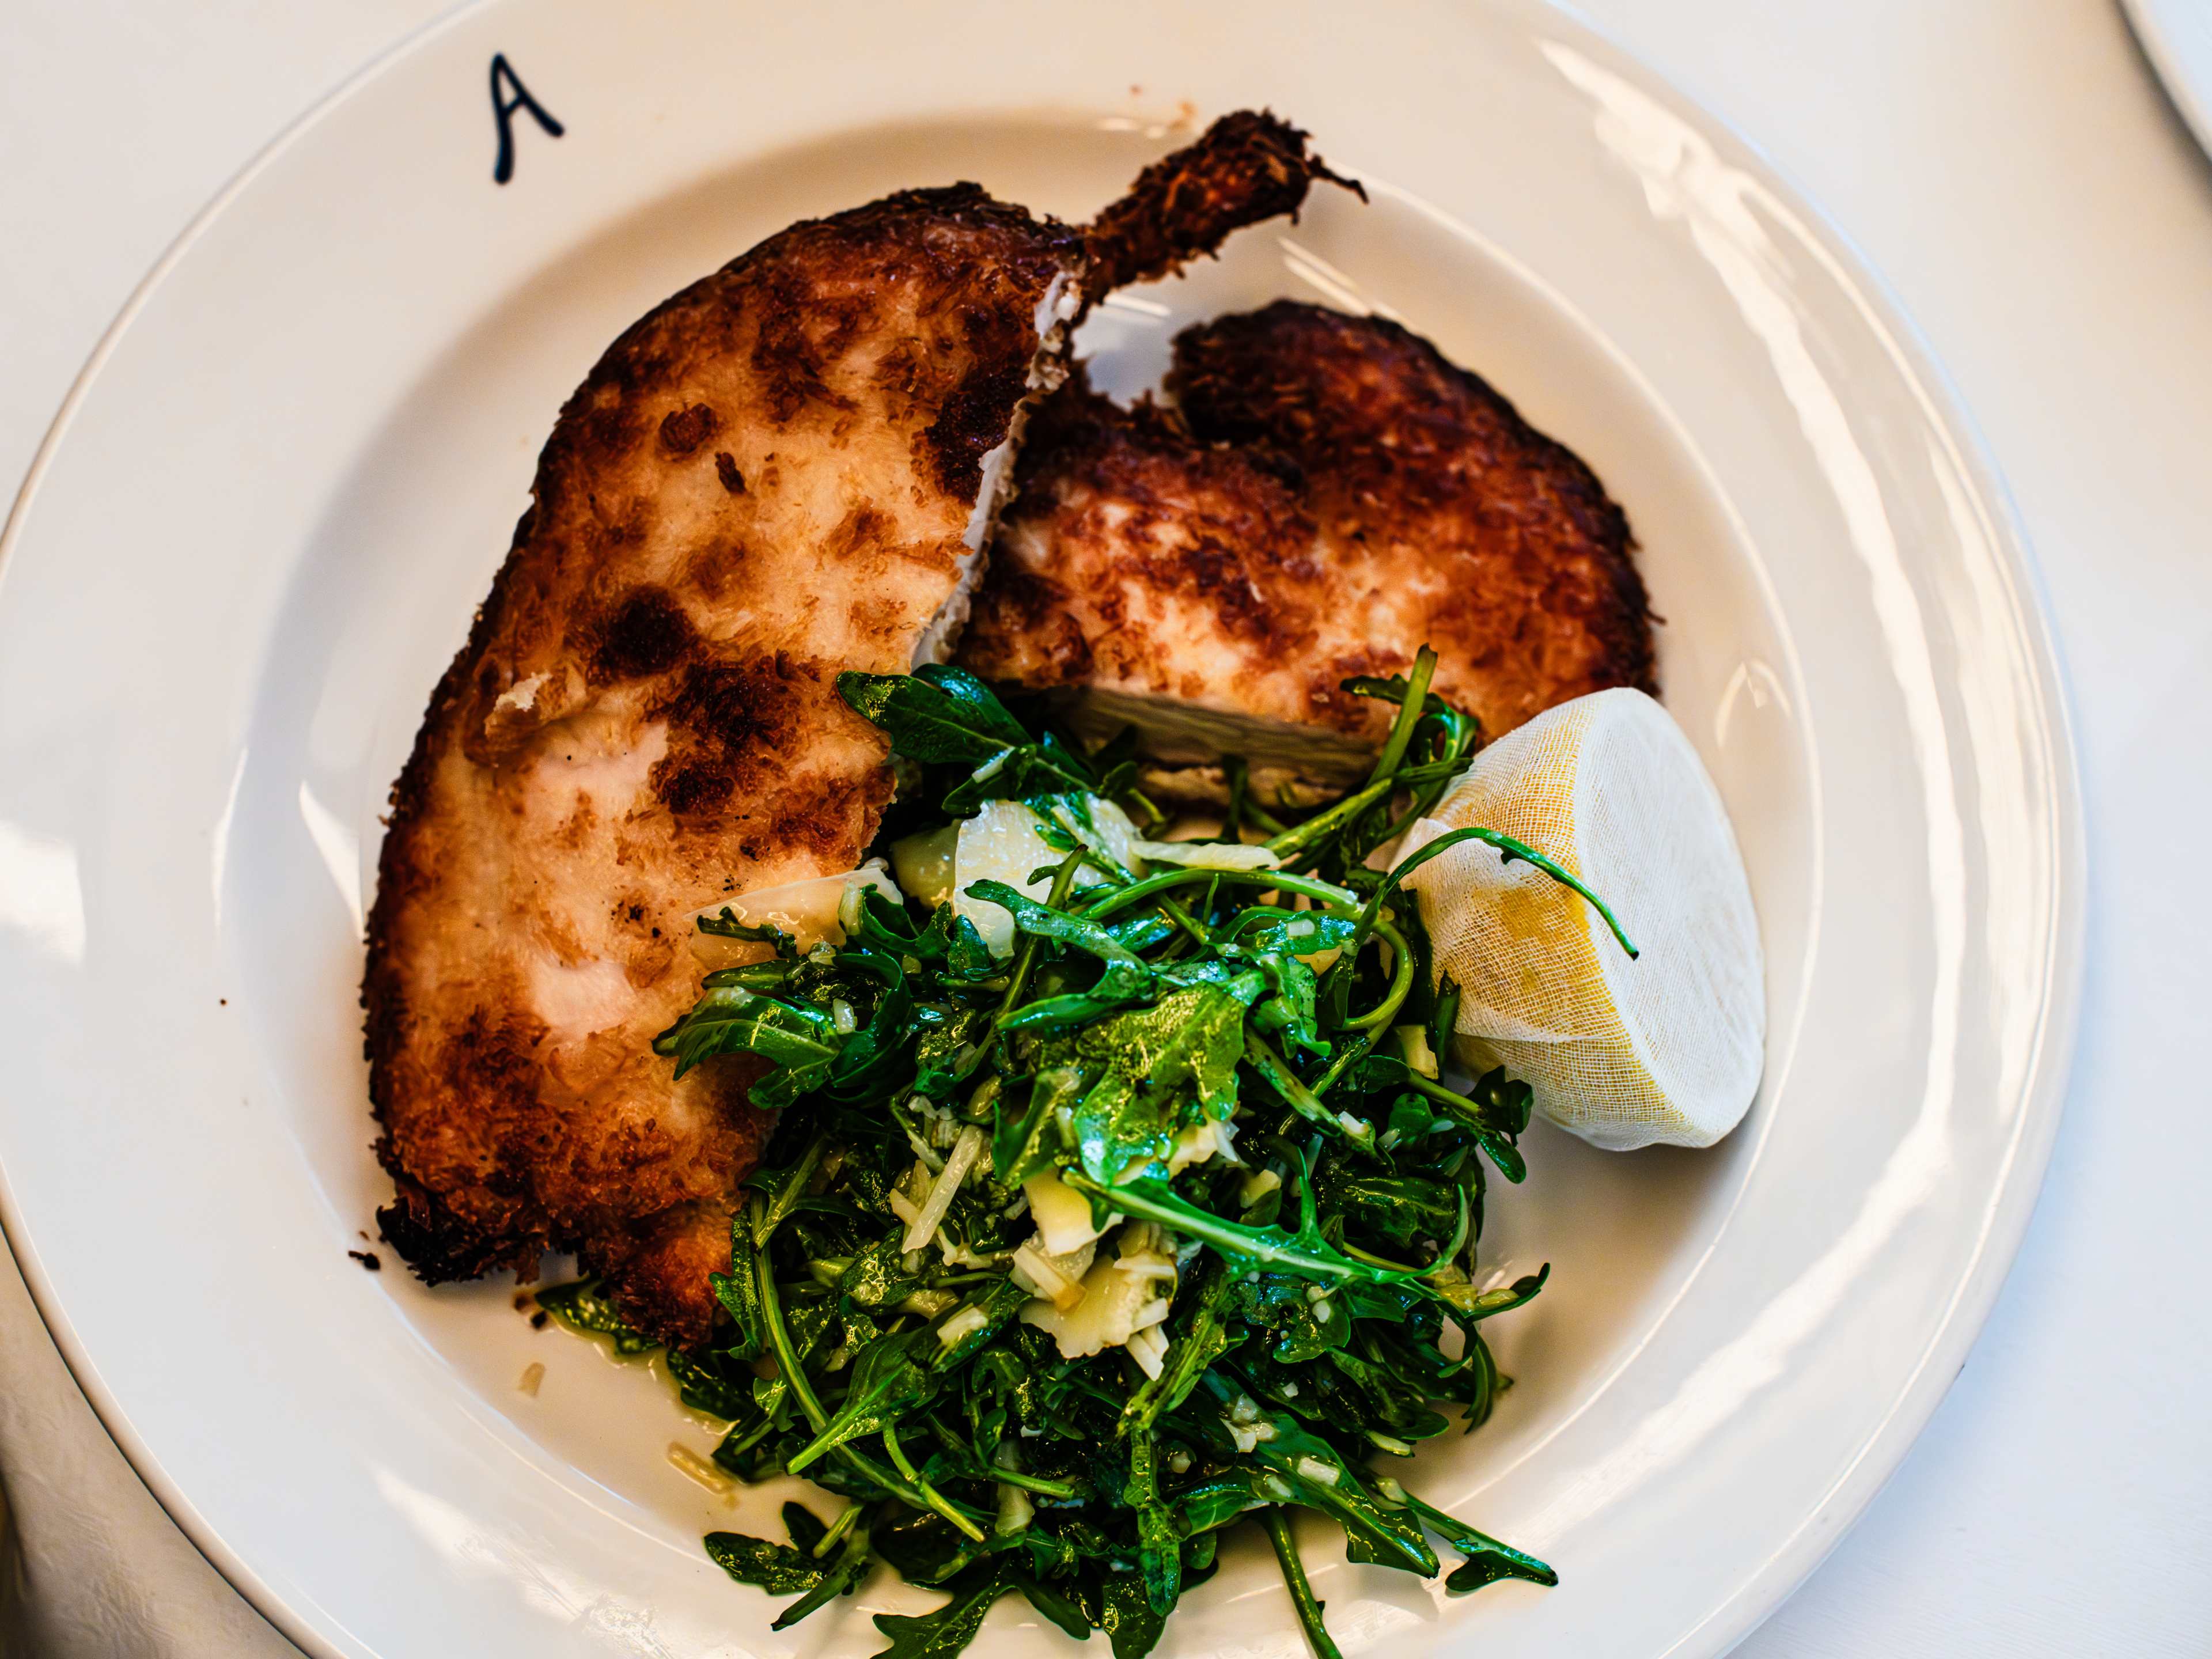 The chicken milanese from Arlington.